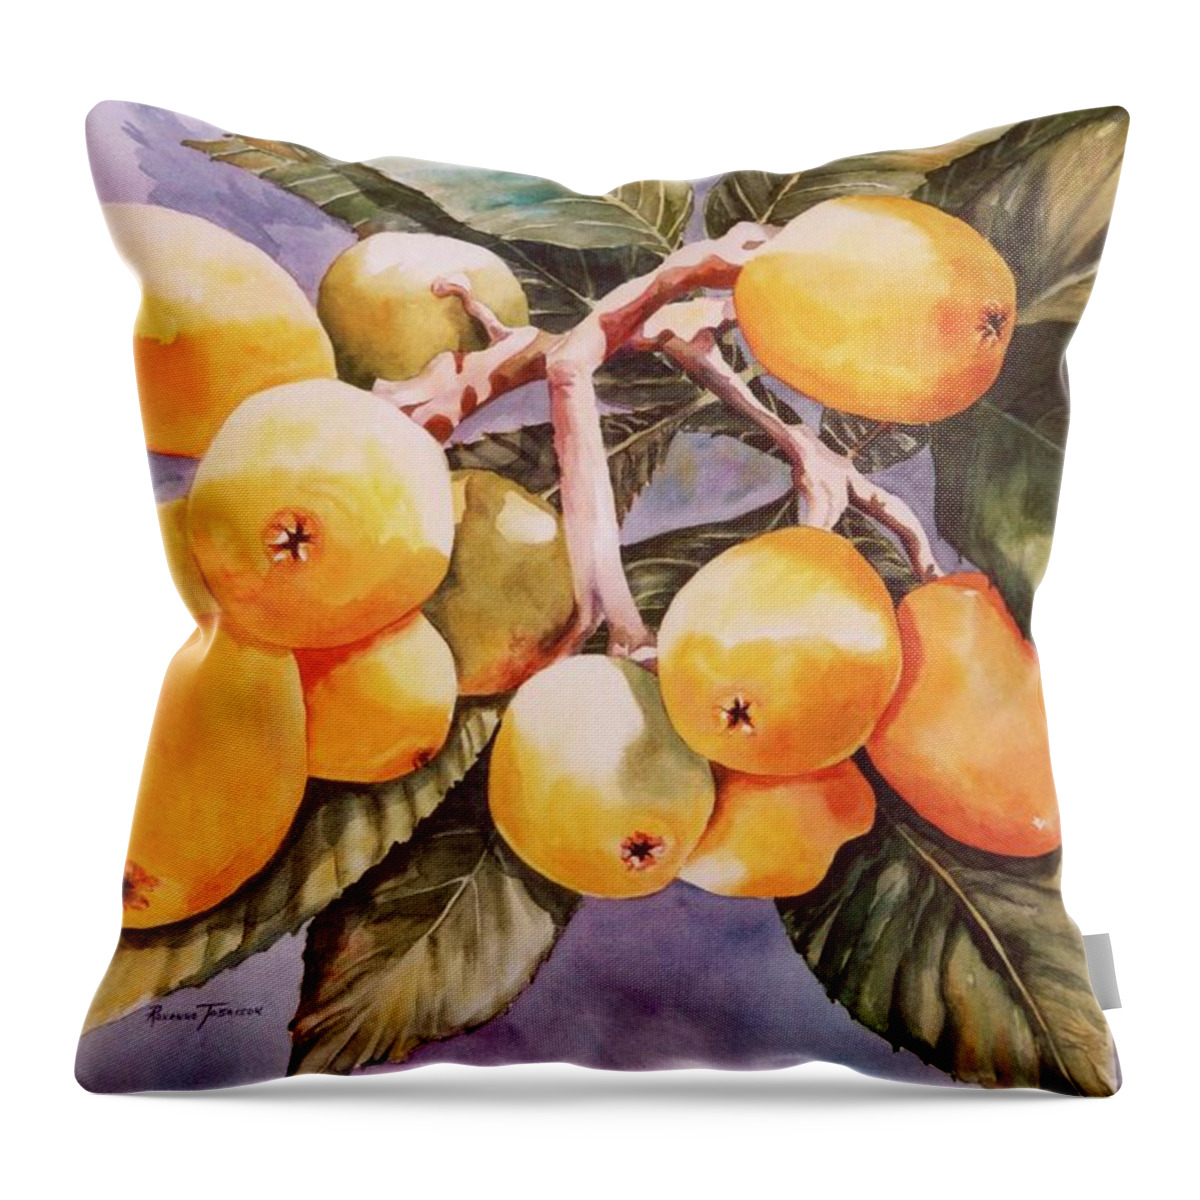 Japanese Plumbs Throw Pillow featuring the painting Plumb Juicy by Roxanne Tobaison